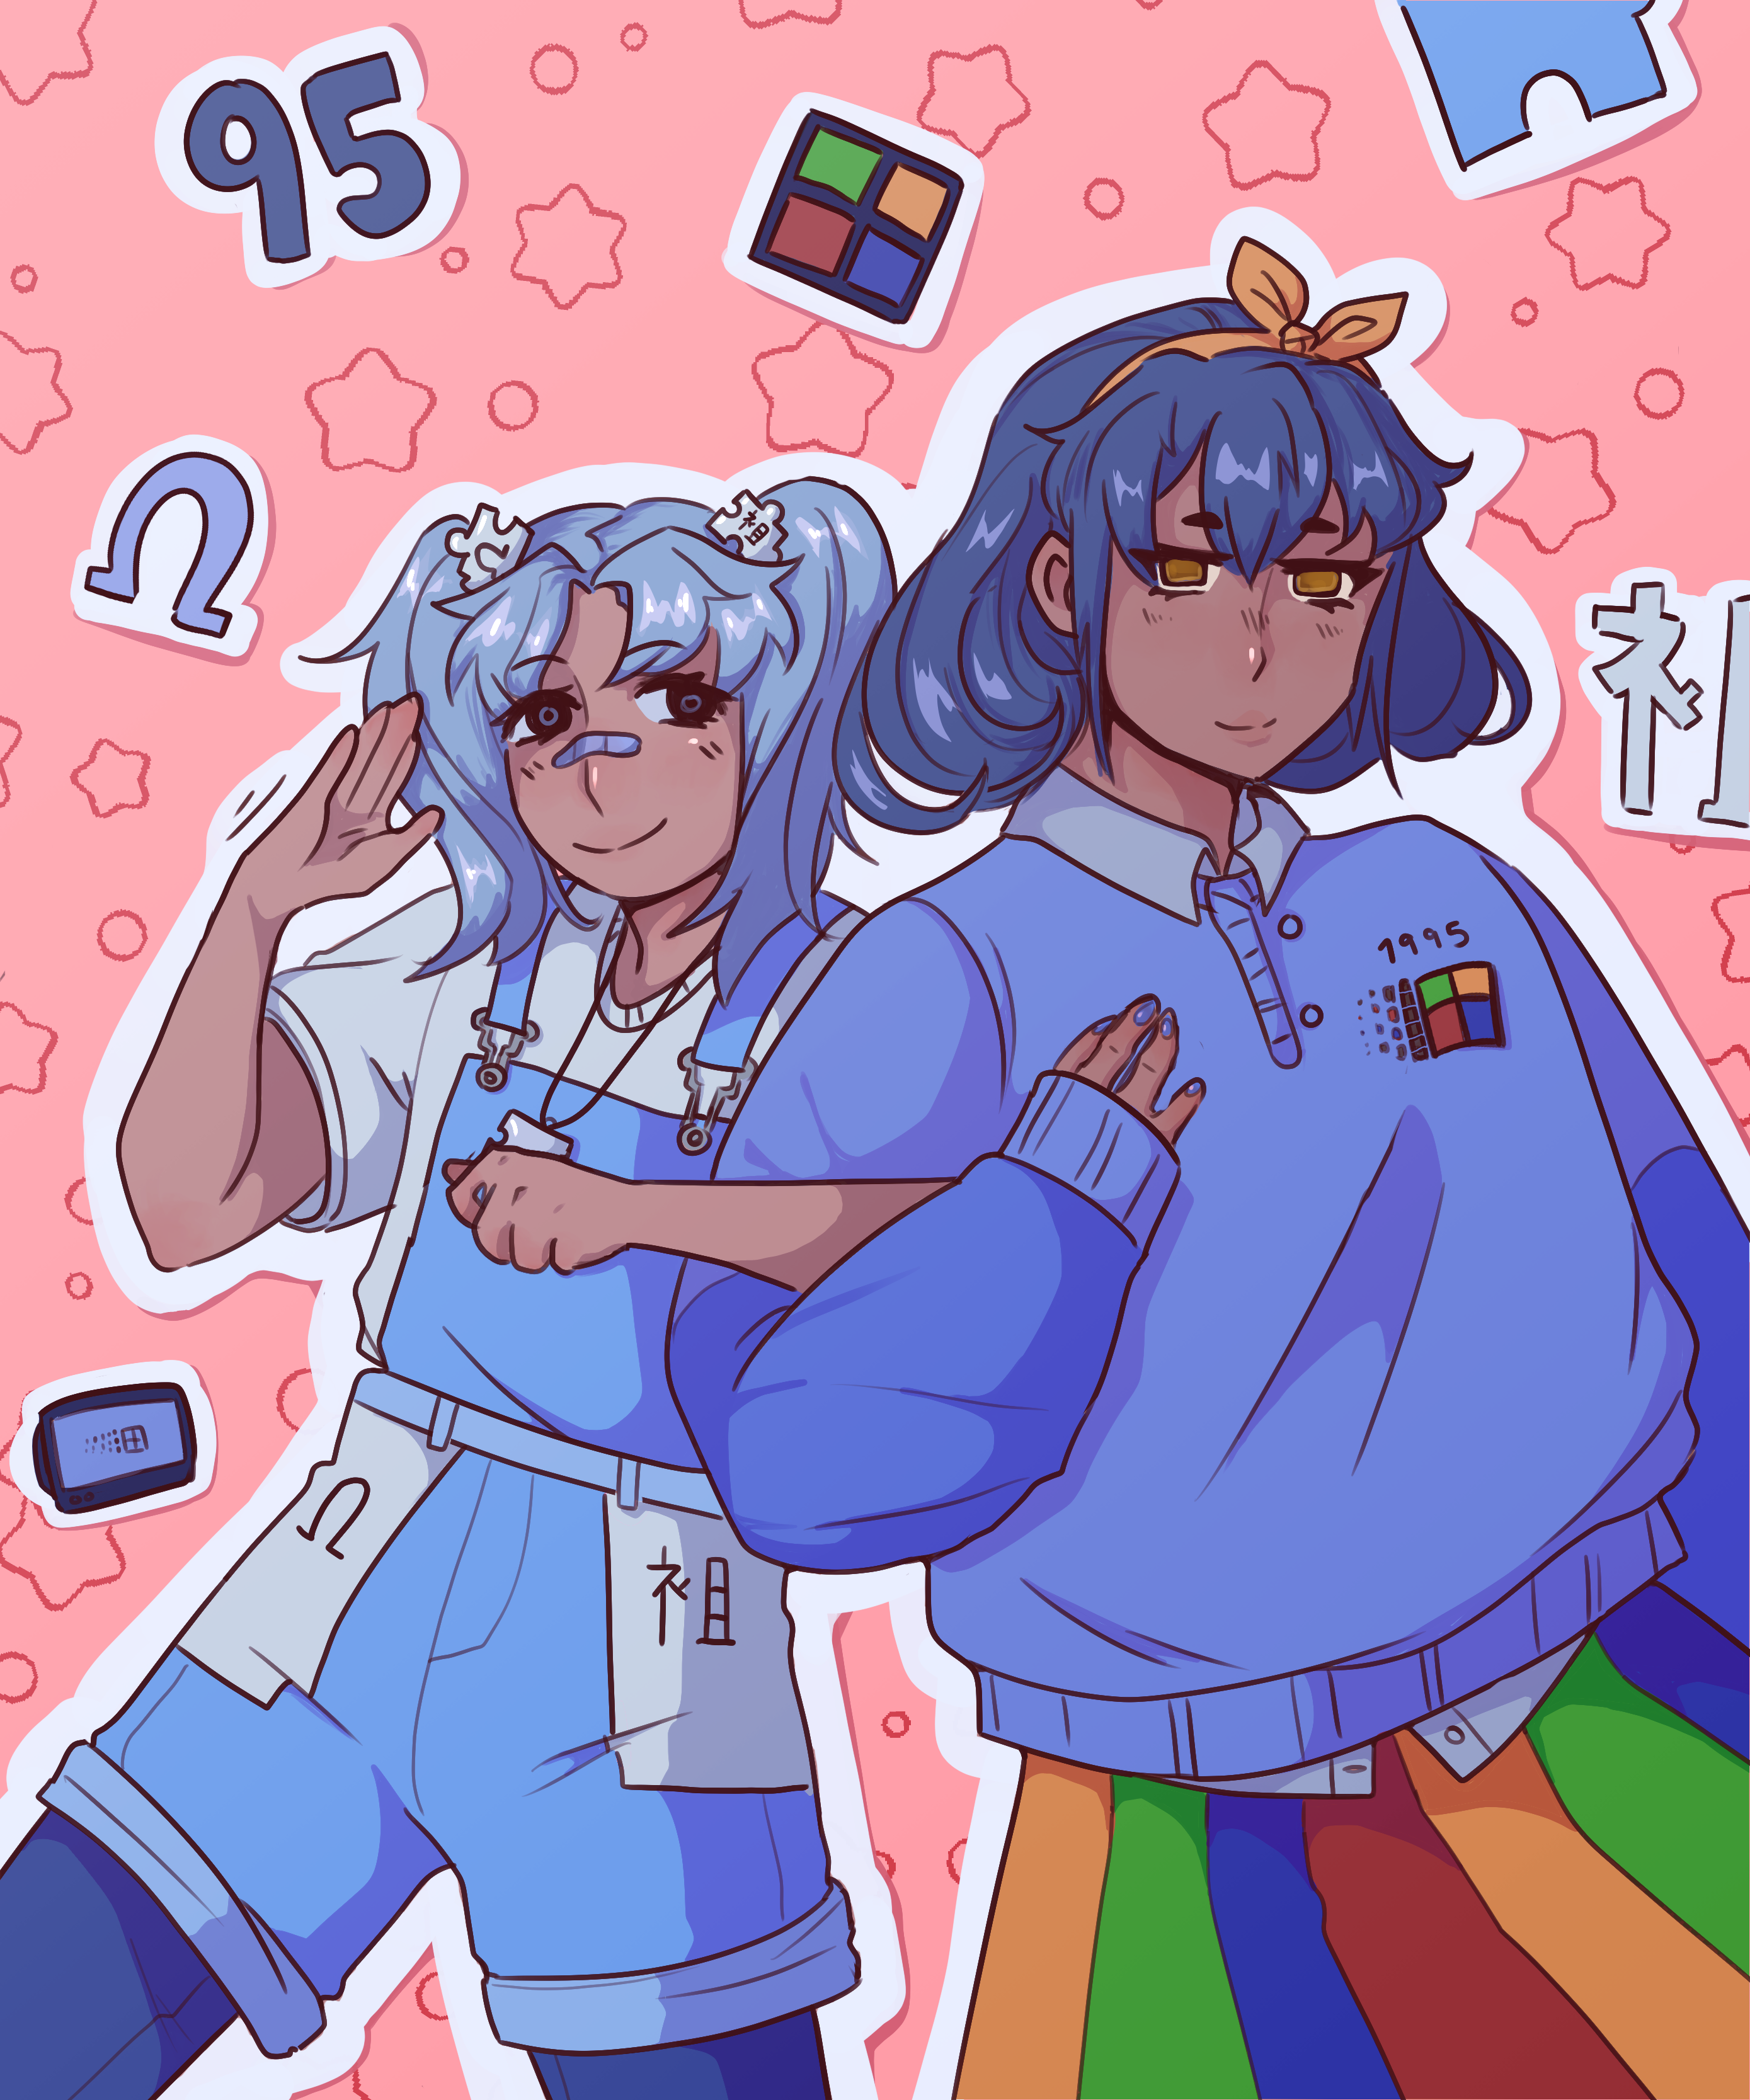 ID: A cartoon drawing of the characters Wikipe-tan and Win-Chan, unofficial mascots for Wikipedia and Windows 95 respectively. They stand with linked arms and smiling at one another. Wikipe-tan is represented as a young teenage girl with pale blue hair in pigtails and medium skin. She wears a pair of blue overalls with white pockets featuring the Wikipedia JP logo. She wears a white puzzle-piece shaped chew necklace and wears similar puzzle pieces as hair ties. Win-Chan stands on the right wearing an oversized blue sweater with a Windows 95 Logo over a pale blue button-up shirt. Underneath she wears a pleated skirt in the Windows colors. Her hair is dark blue and curled into large ringlets. She also wears a yellow headband with a bow. The image is rendered as if the characters are on a sticker. The background is covered in stickers of various Wikipedia and Windows-themed symbols. End ID.